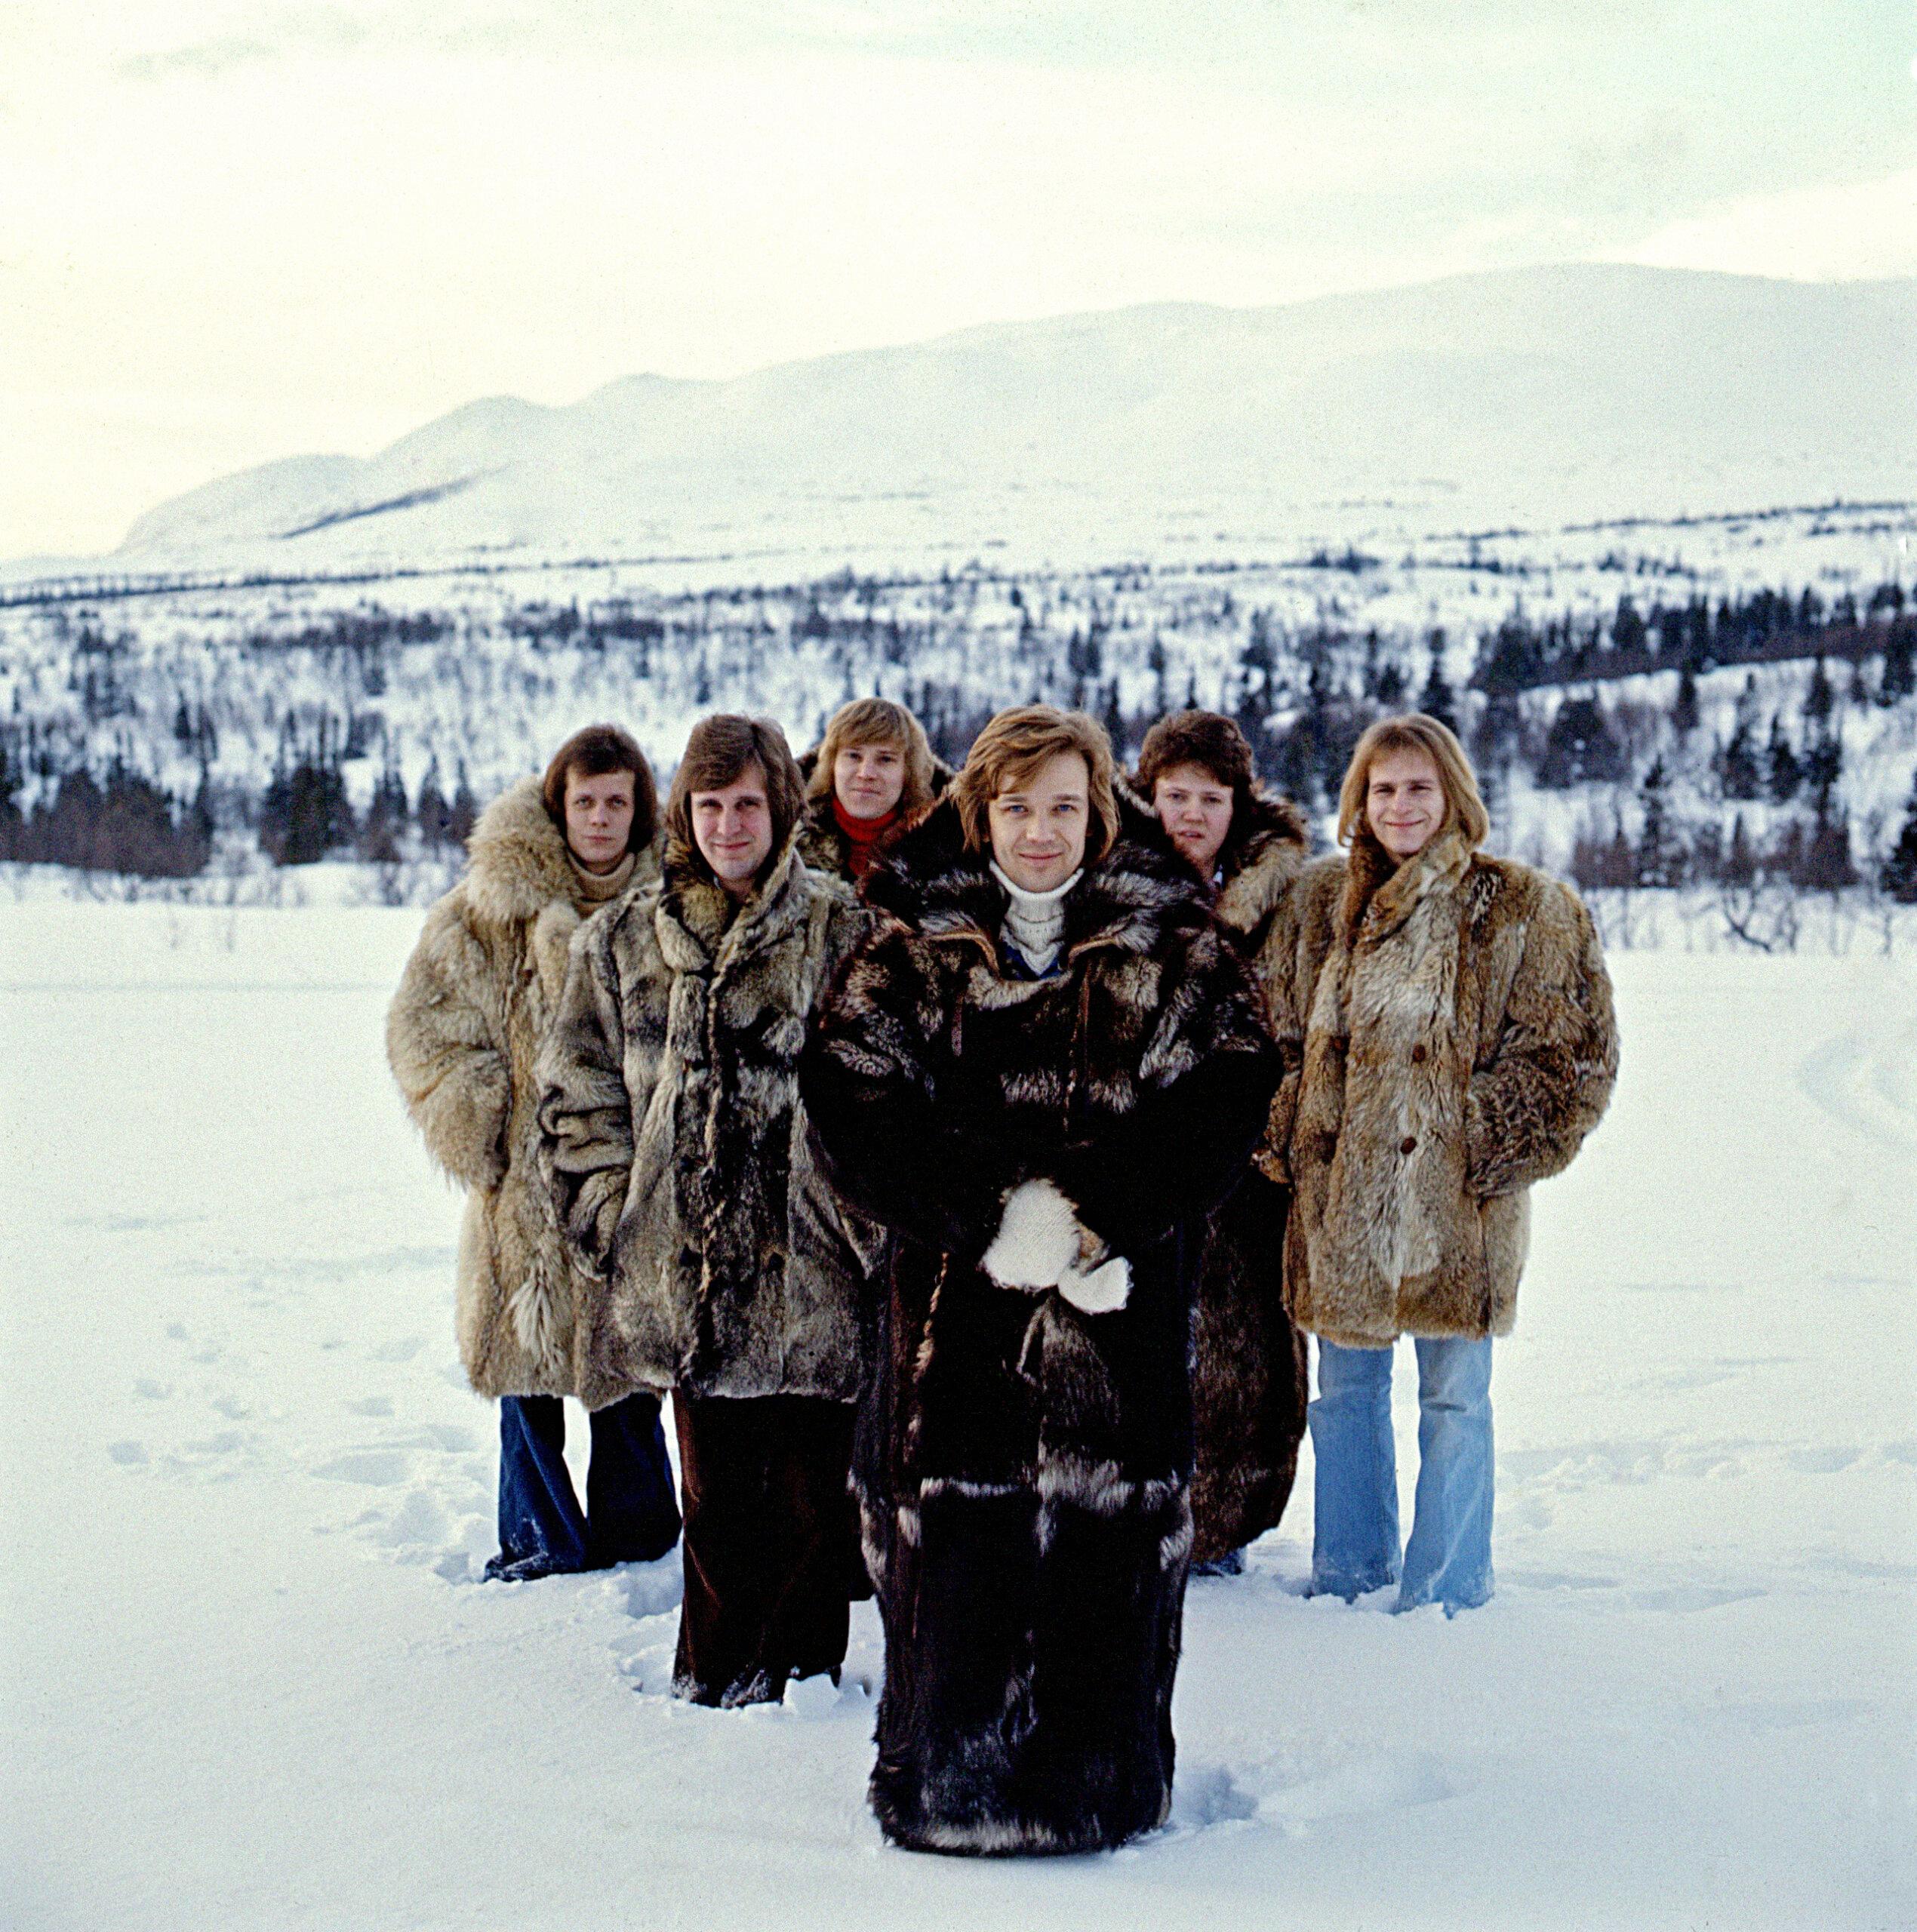 The five men of Blue Swede all wearing furs and standing in a snowy white landscape, Björn Skifs at the front.